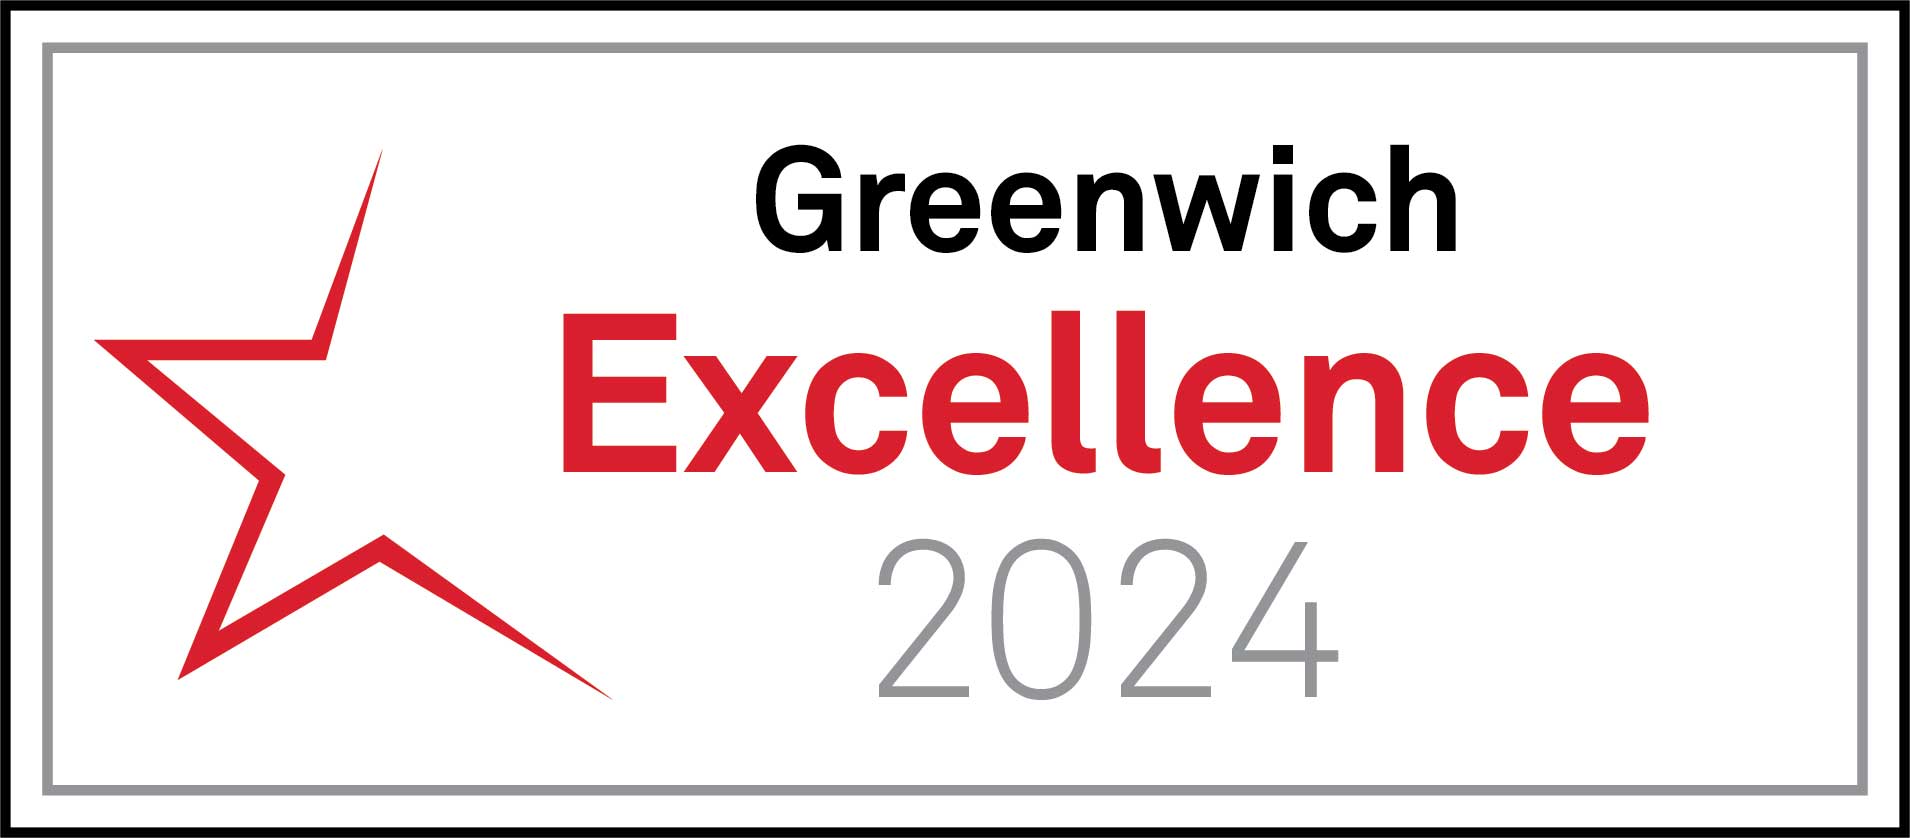 Greenwich Excellence 2024